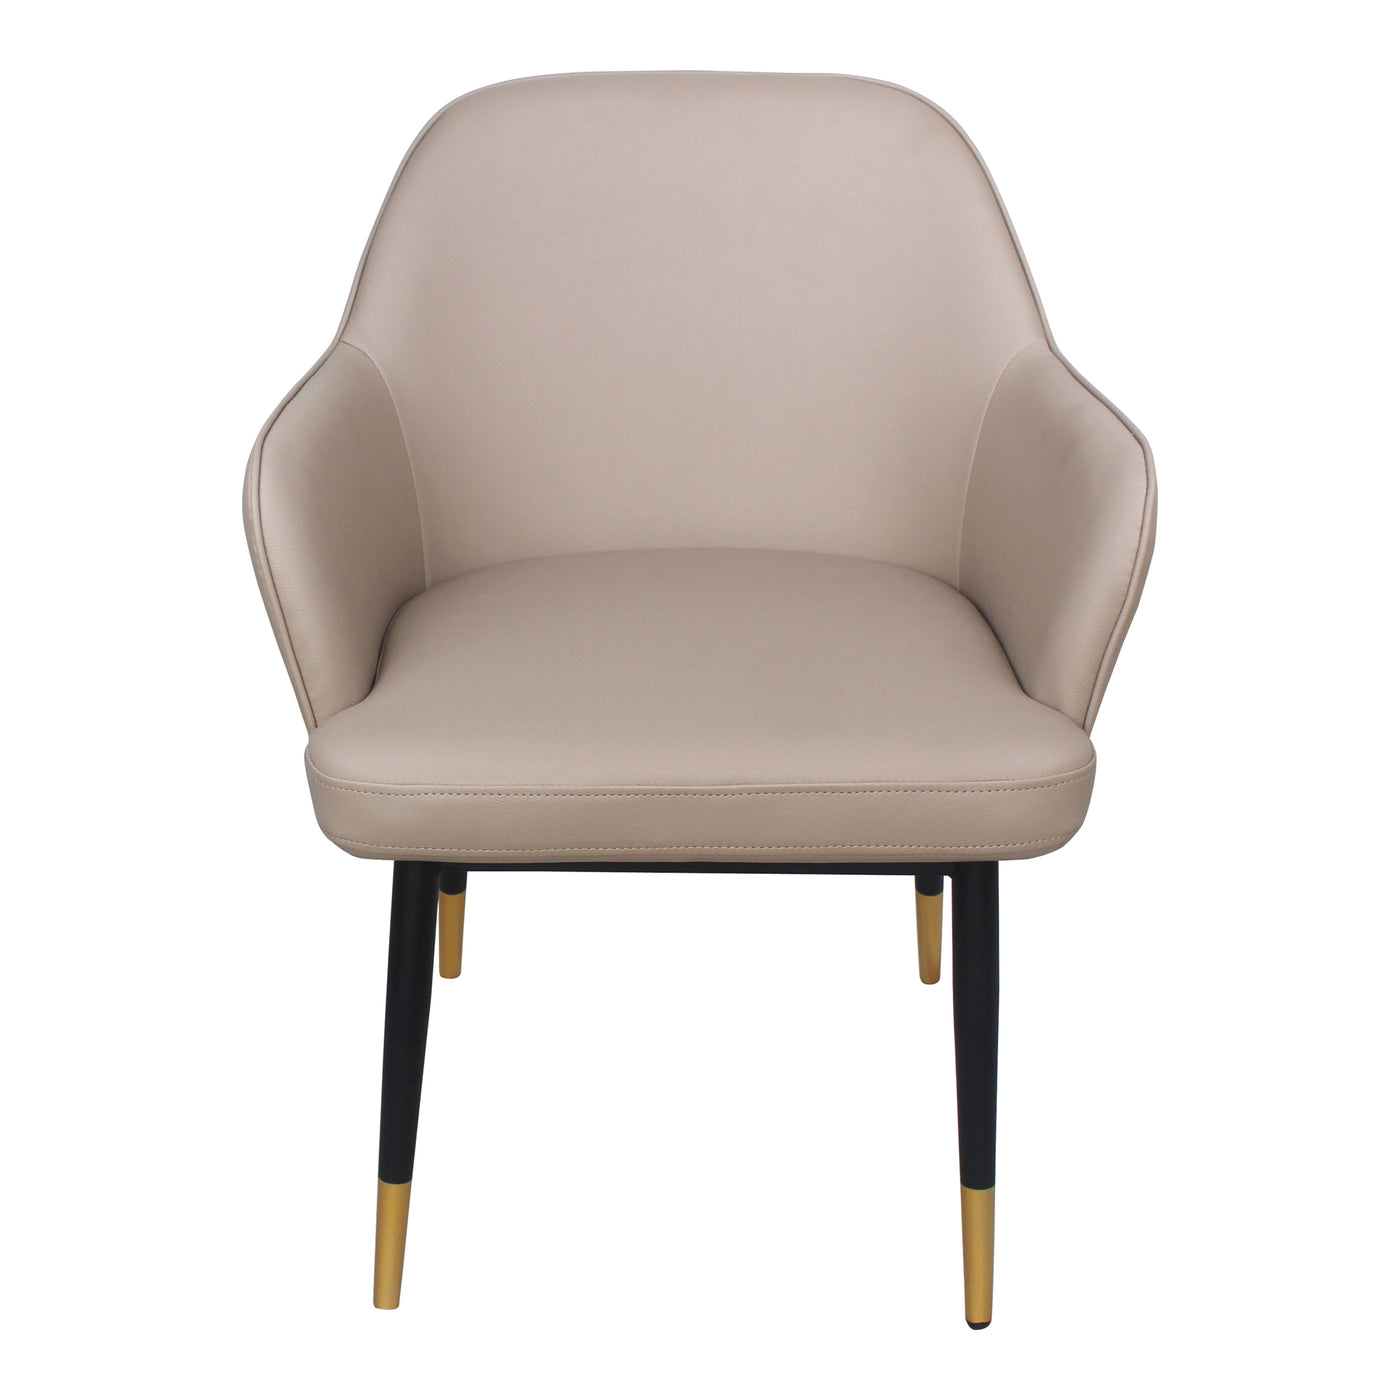 The Berlin Accent Chair is all about sophisticated elegance. With faux leather upholstery and brass detailing, this chair ...